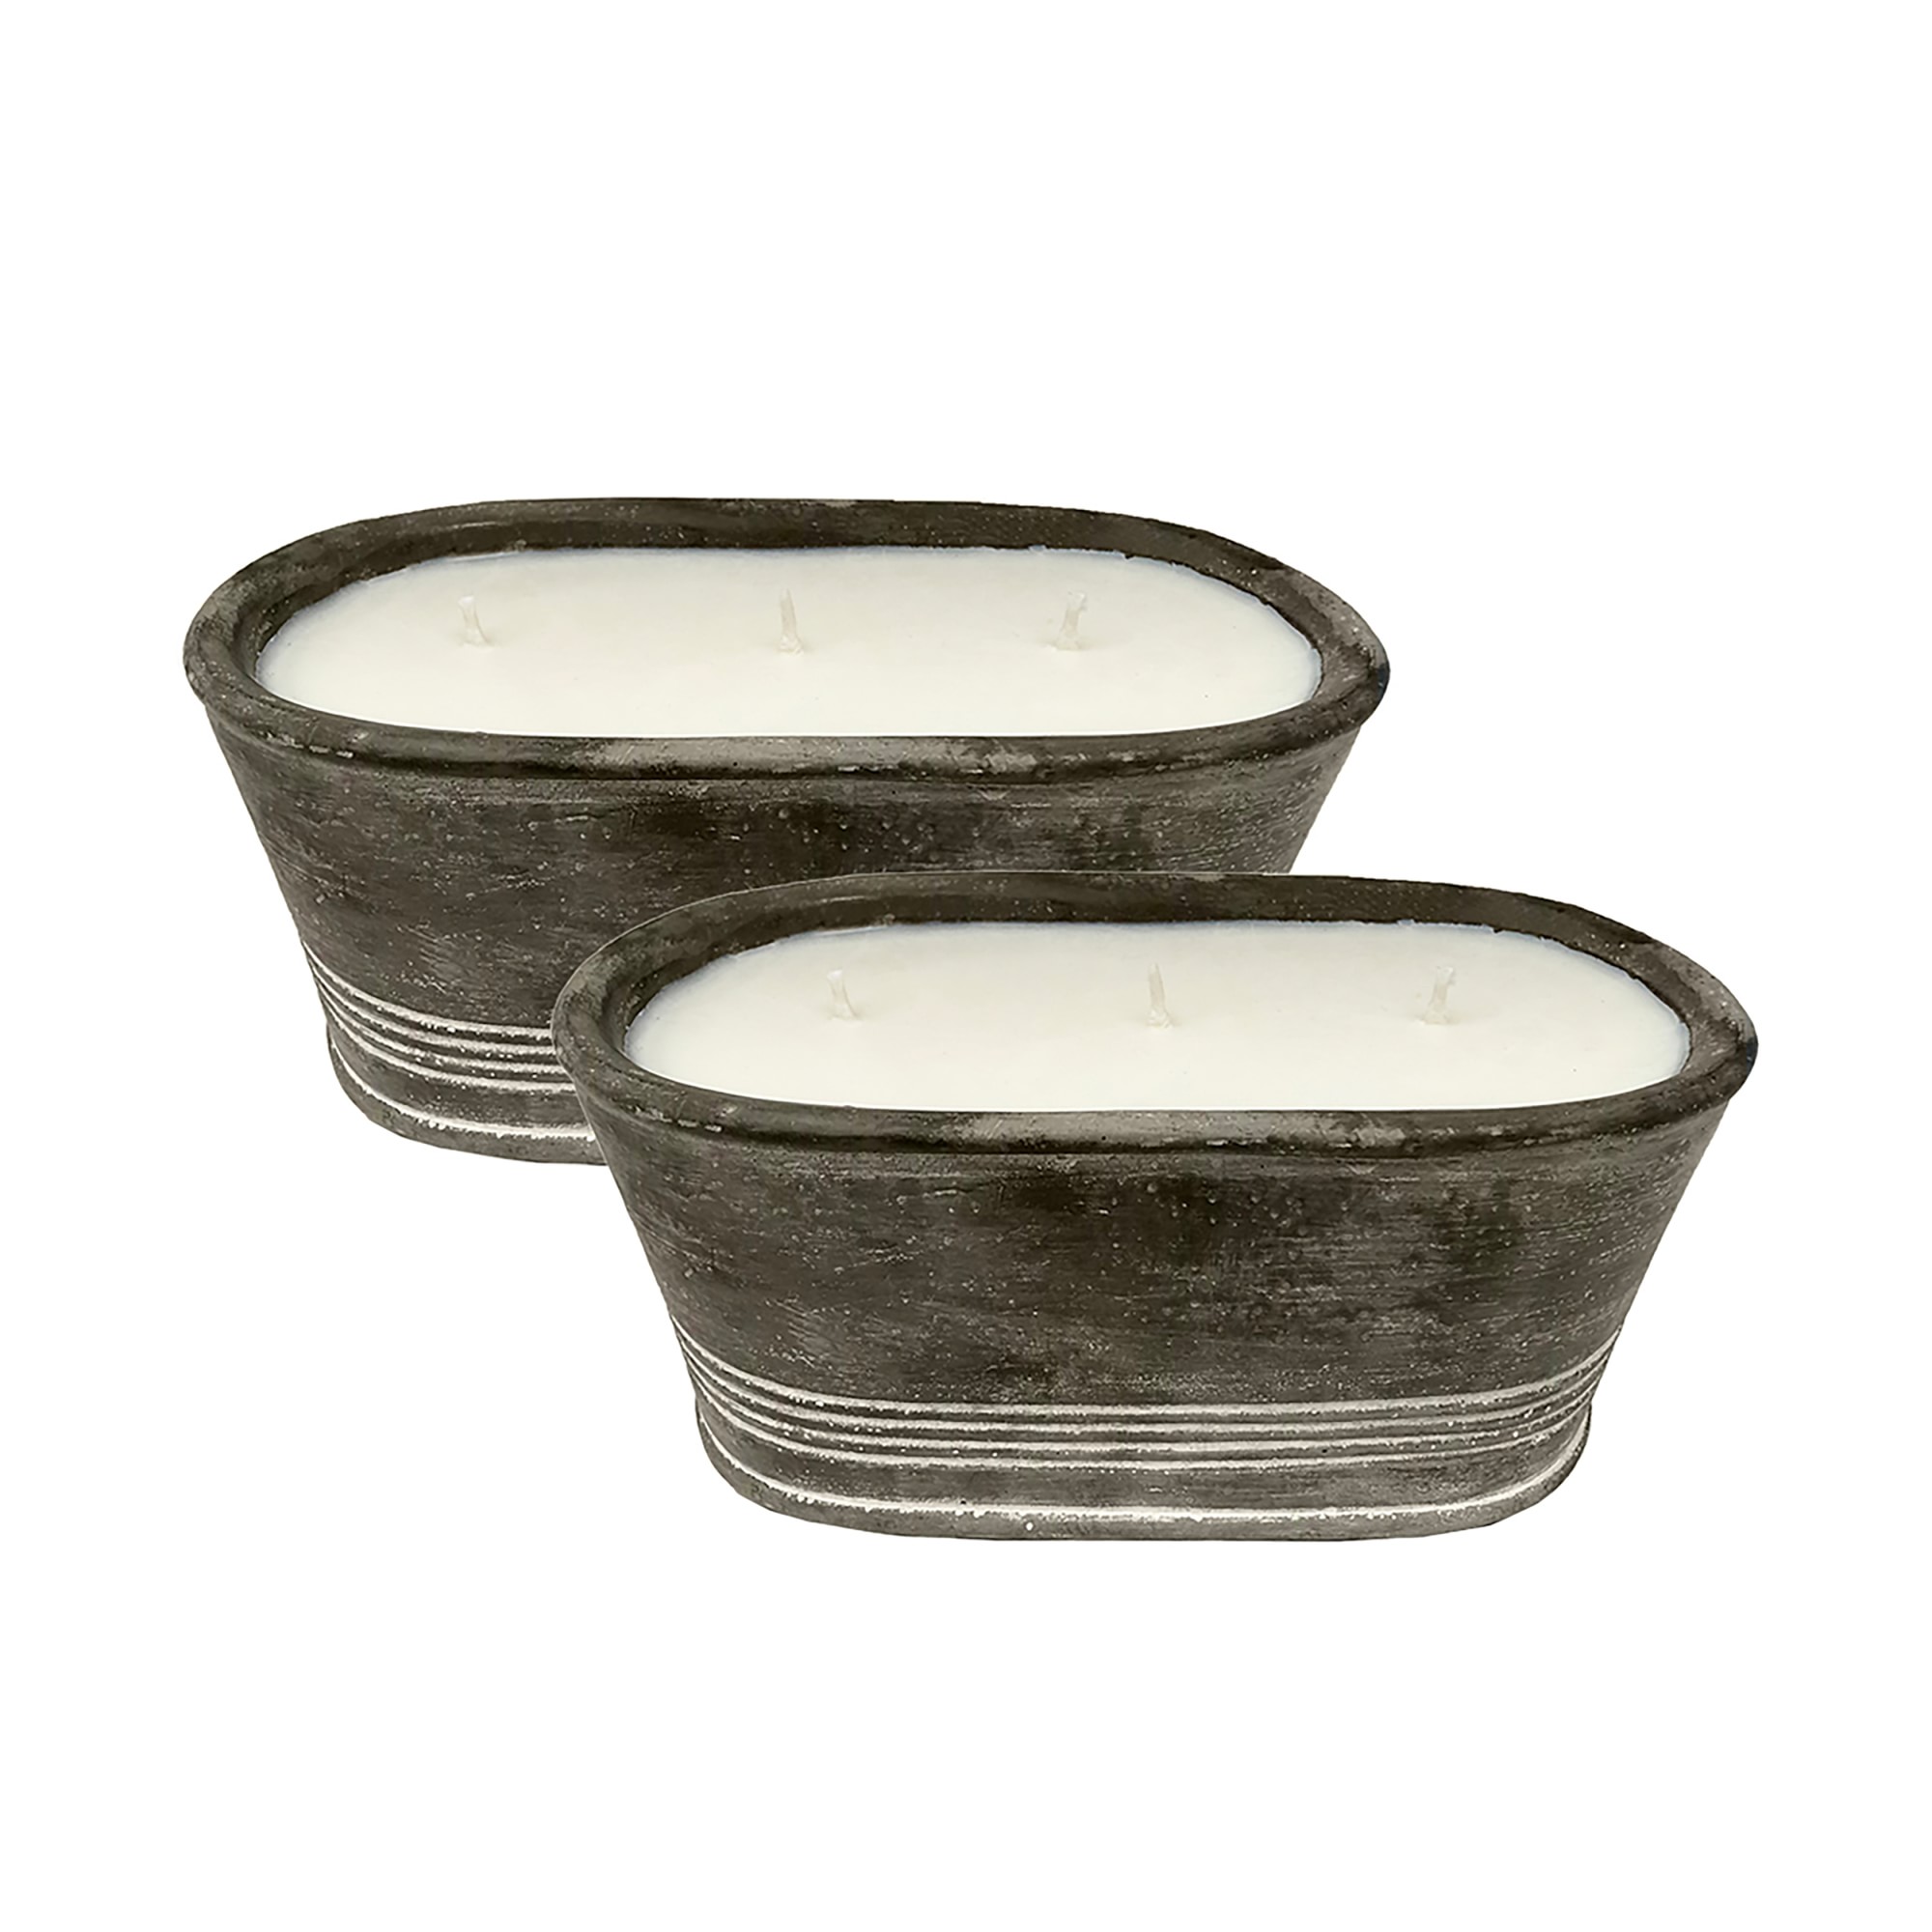 K. Hall 3 Wick Tub Garden Cement Citronella Outdoor Candle